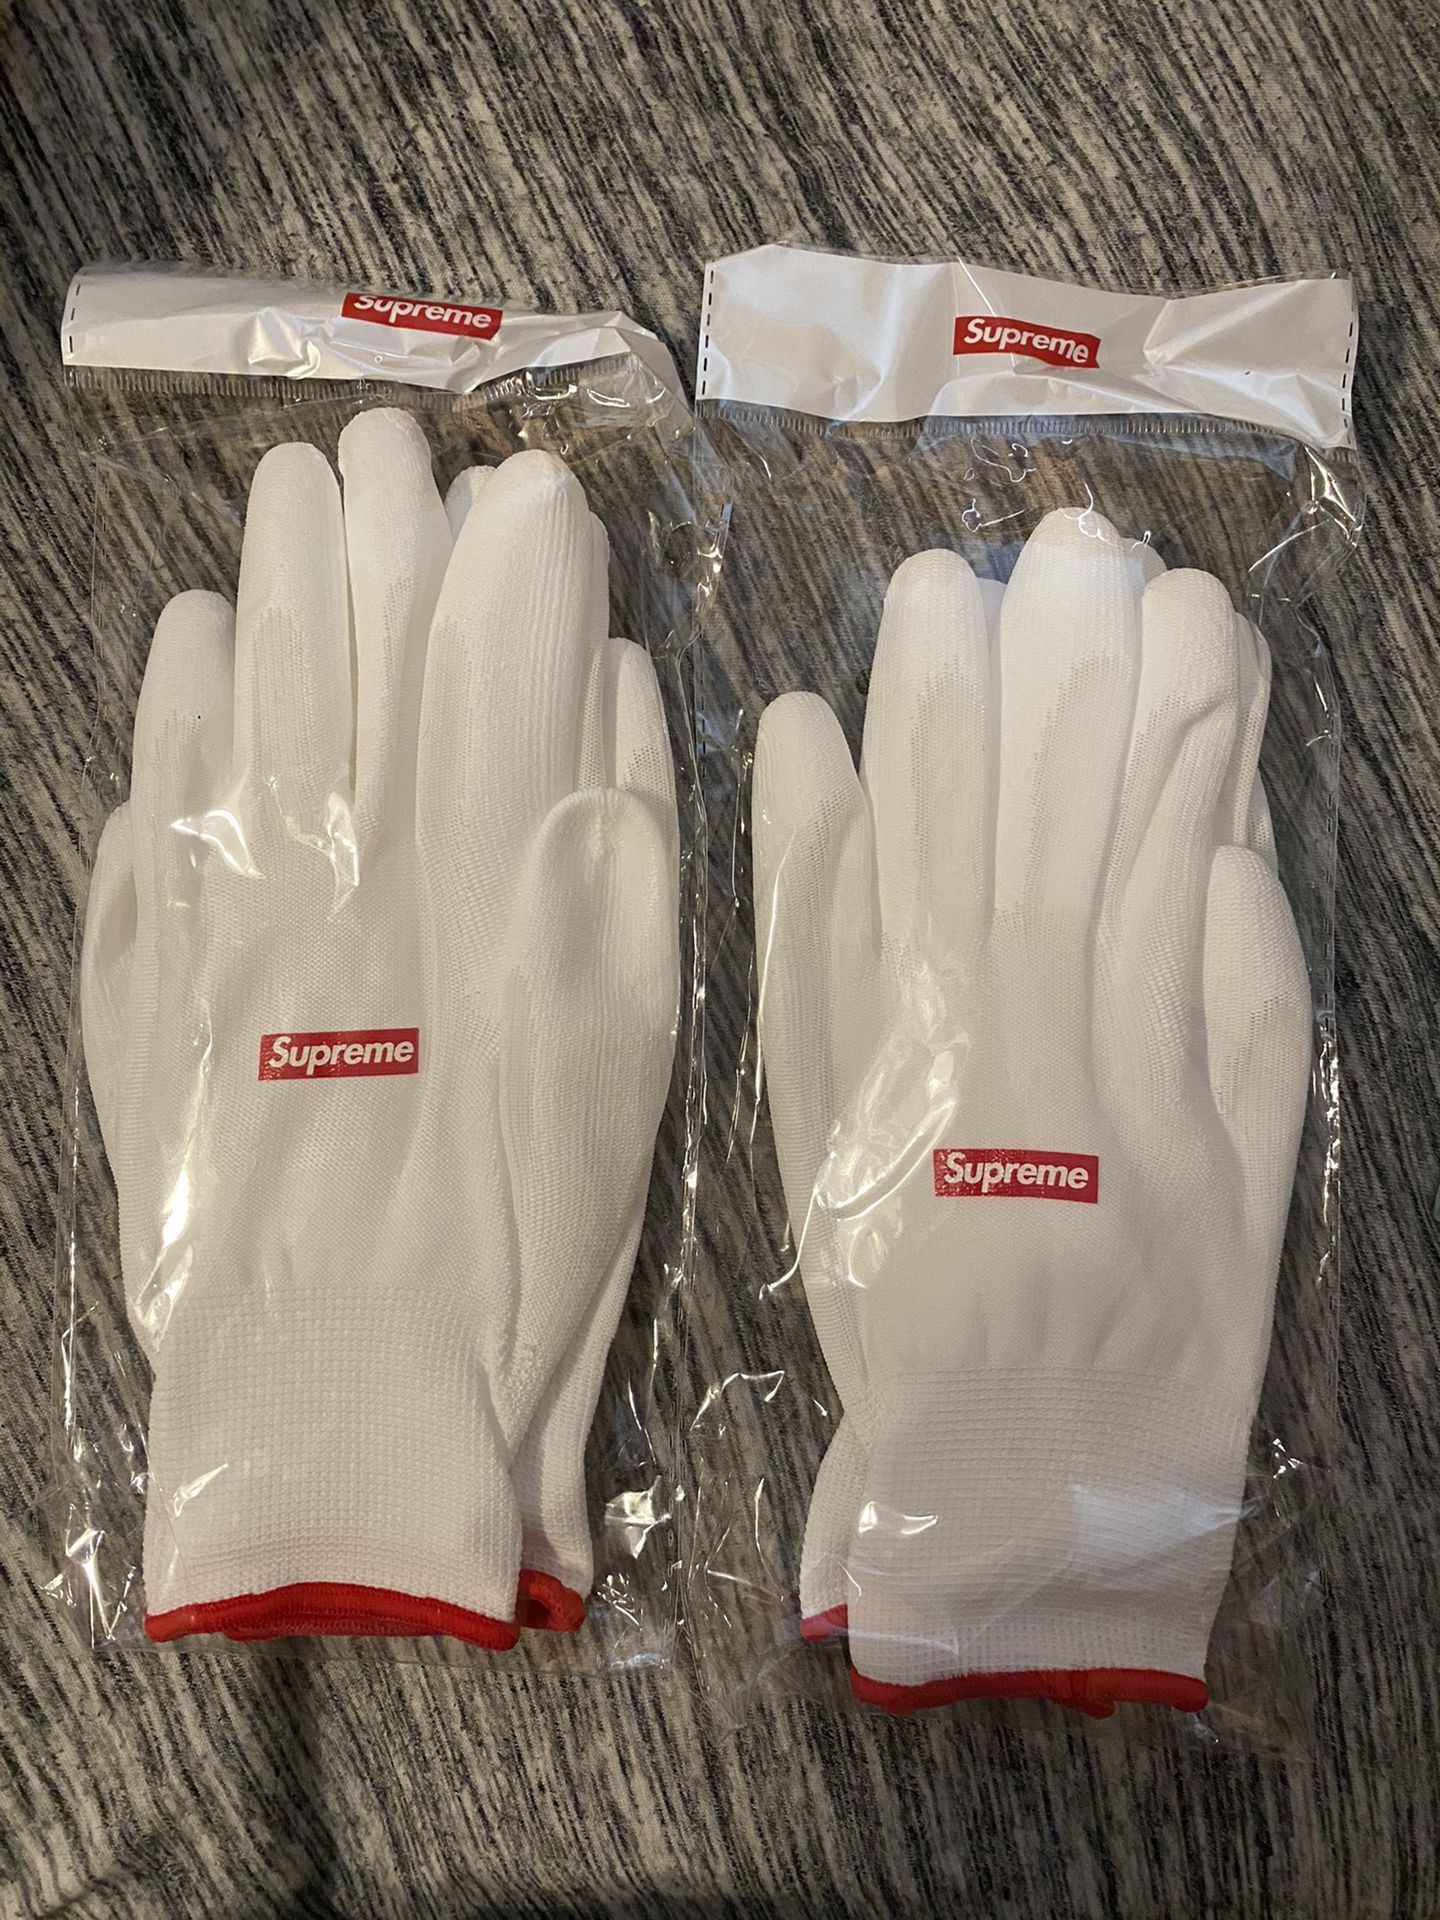 Supreme rubberized gloves. 2 pair